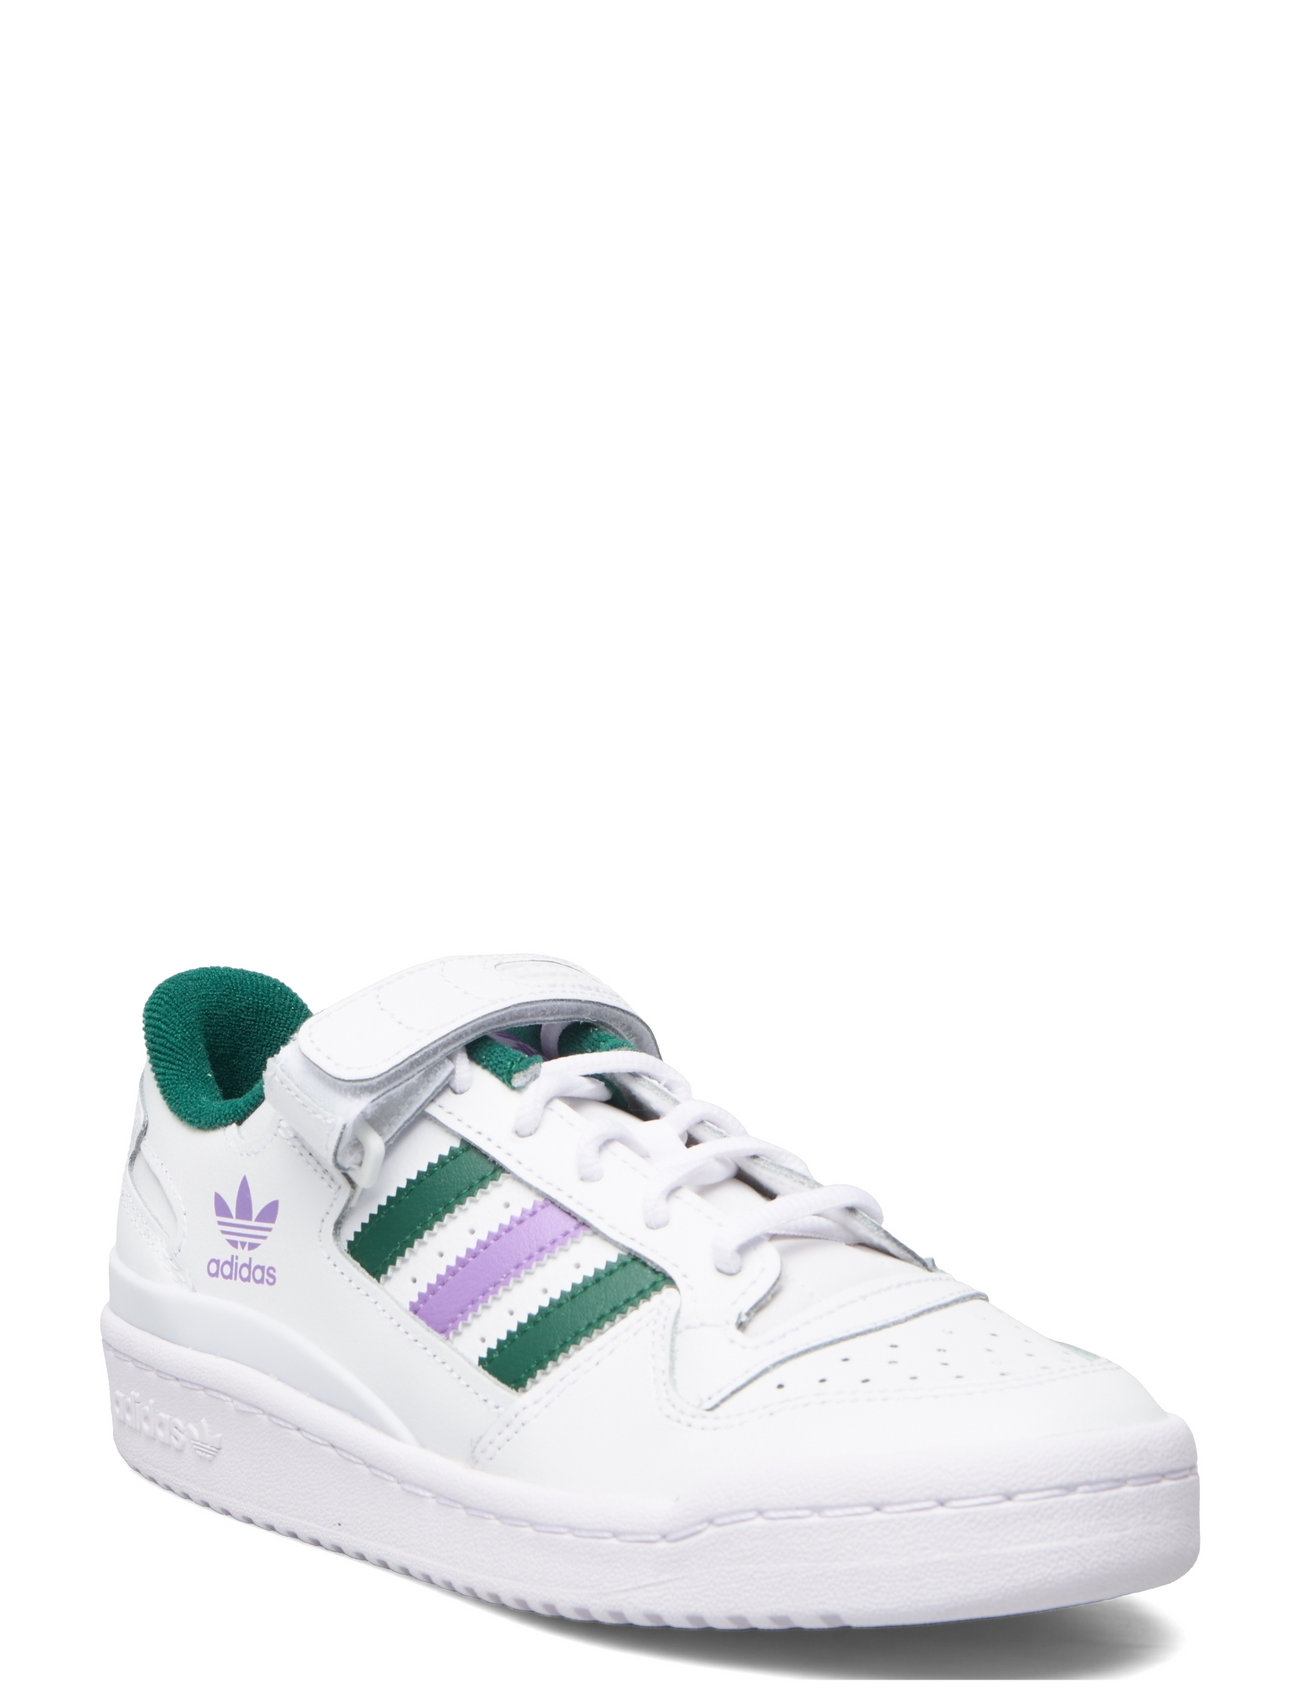 "adidas Originals" "Forum Low Shoes Sport Sneakers Low-top White Adidas